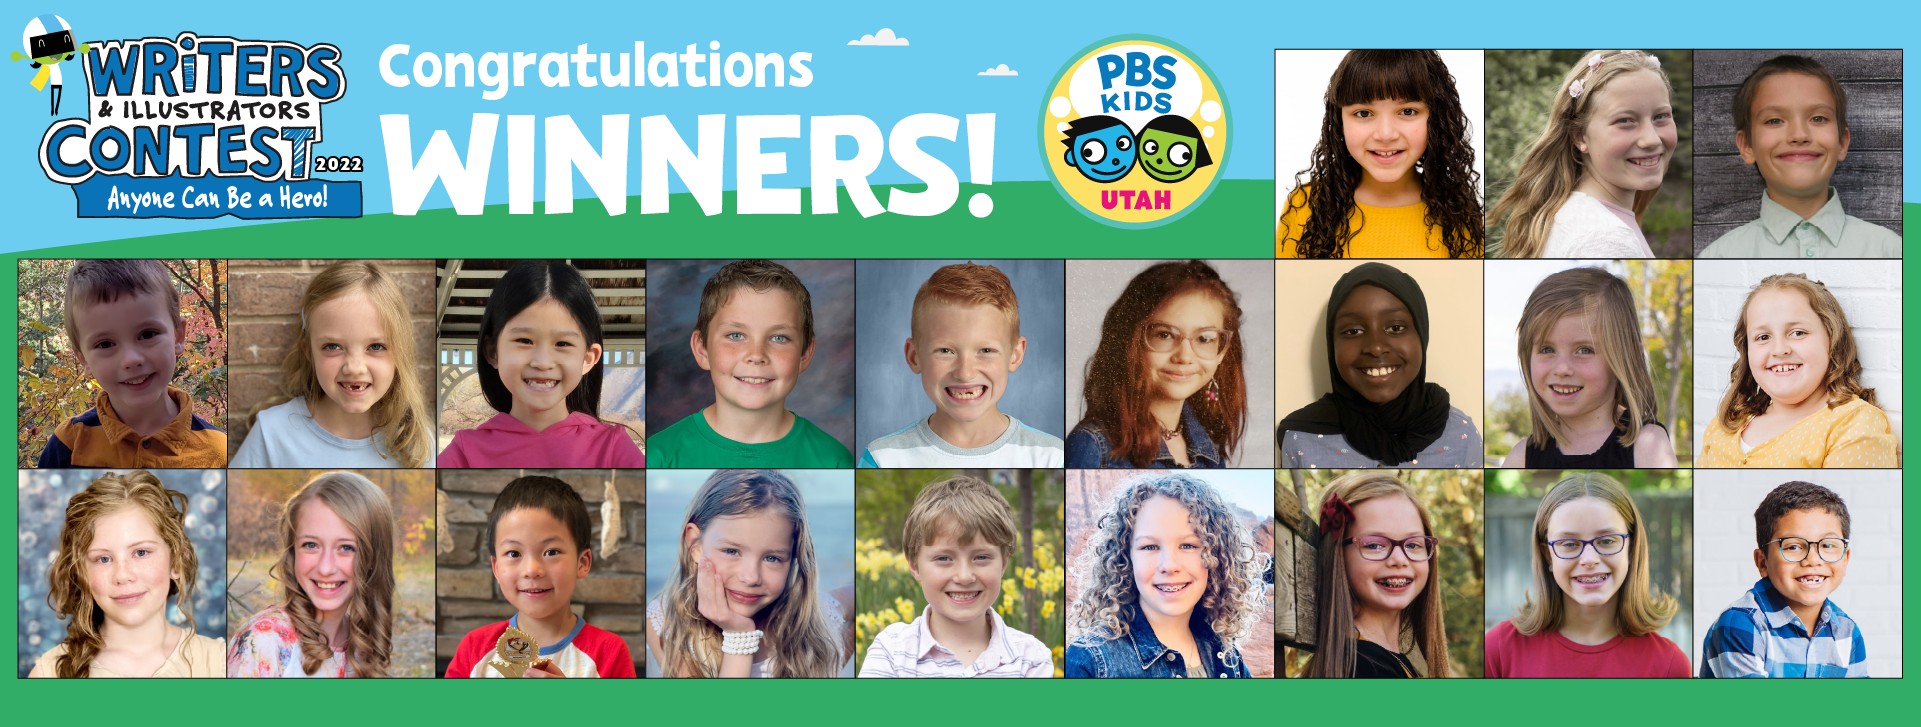 Congratulations Winners! 2021 Writers and Illustrators Contest - Celebrate the Outdoors